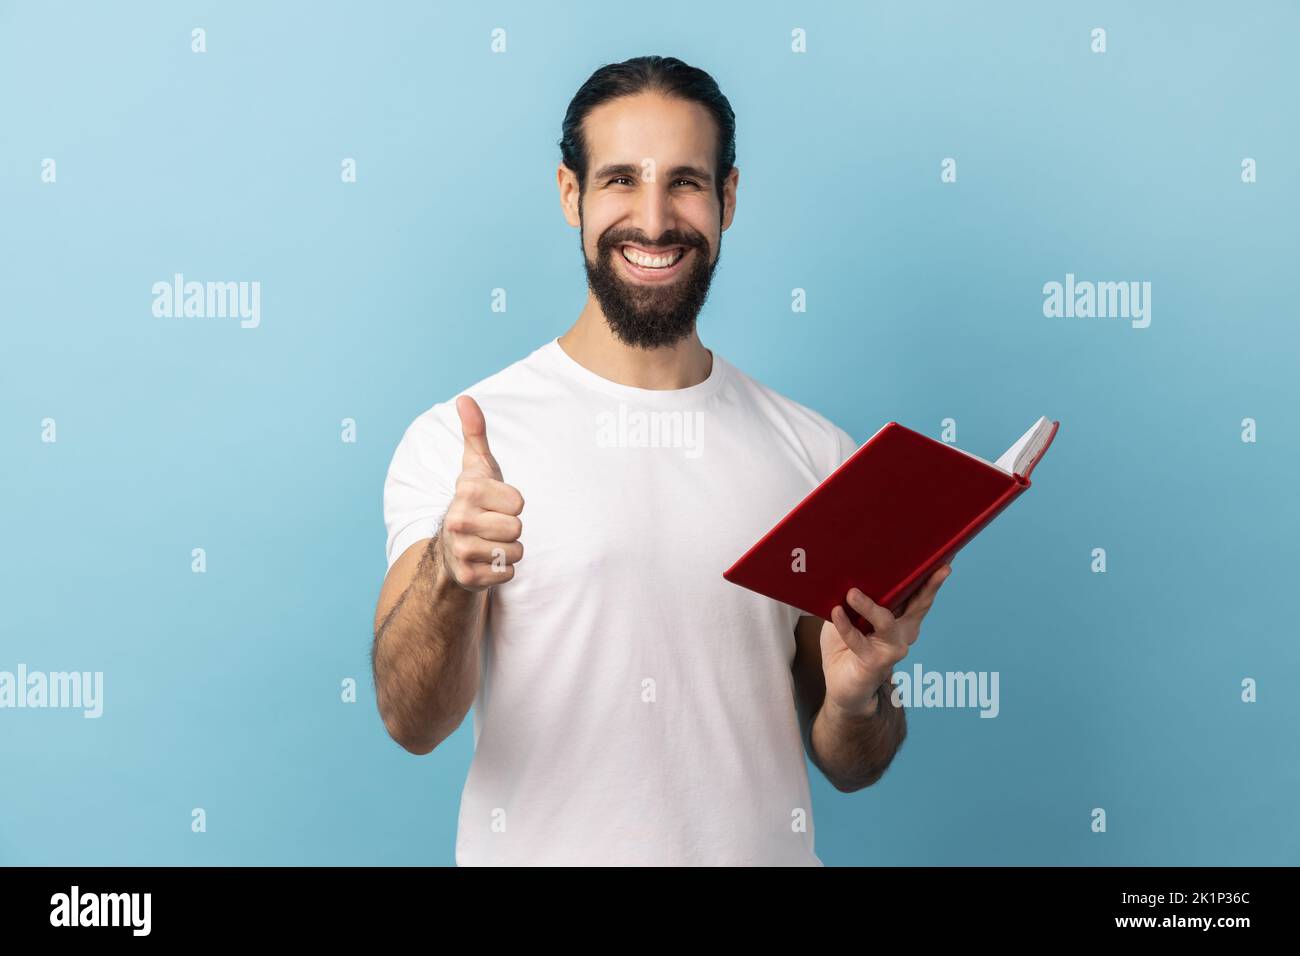 Portrait of positive happy man with beard wearing white T-shirt showing thumbs up gesture holding and reading book, likes genre and plot. Indoor studio shot isolated on blue background. Stock Photo